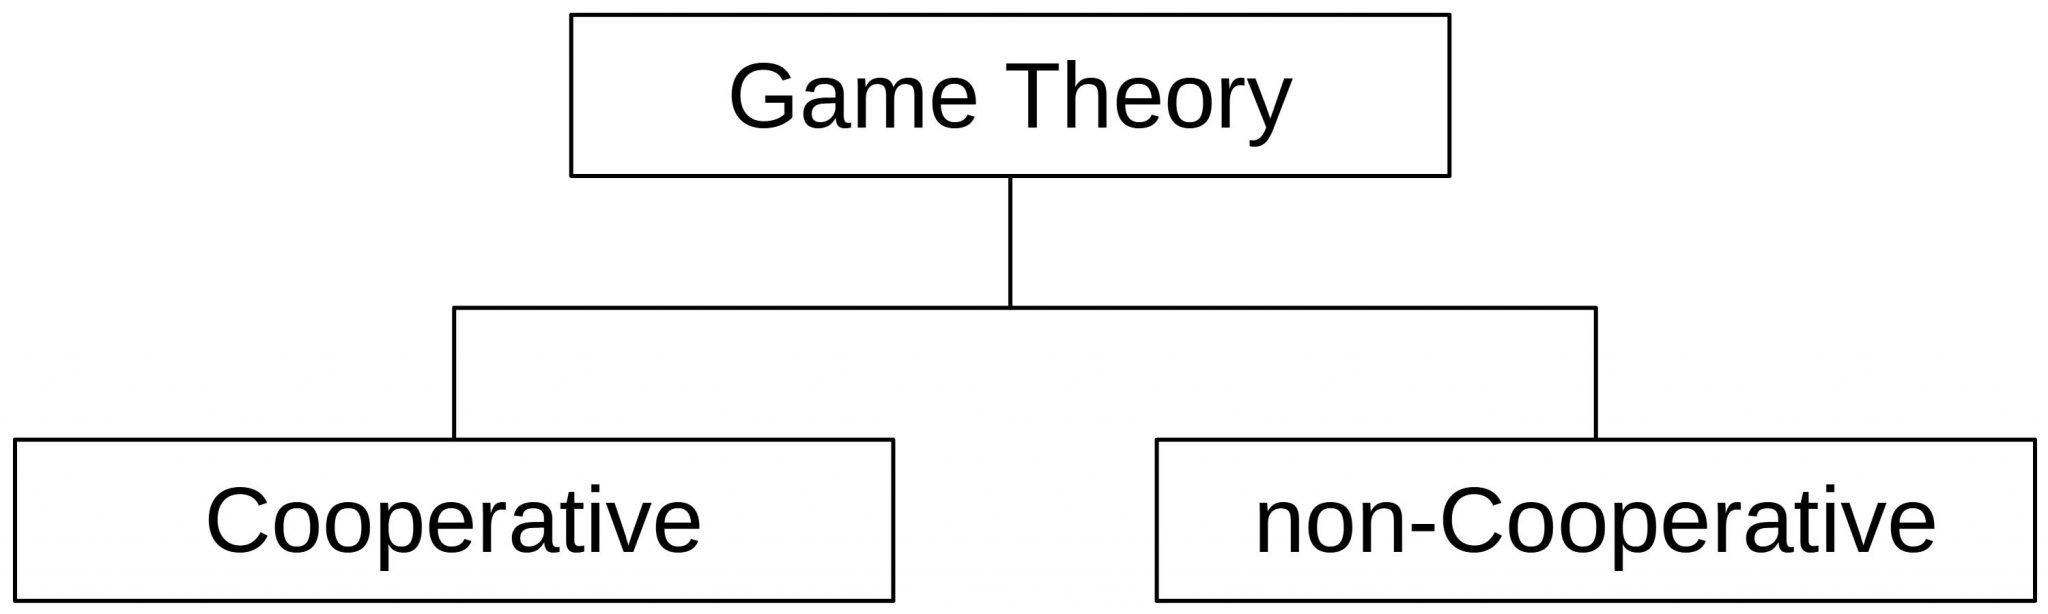 cooperative game theory literature review